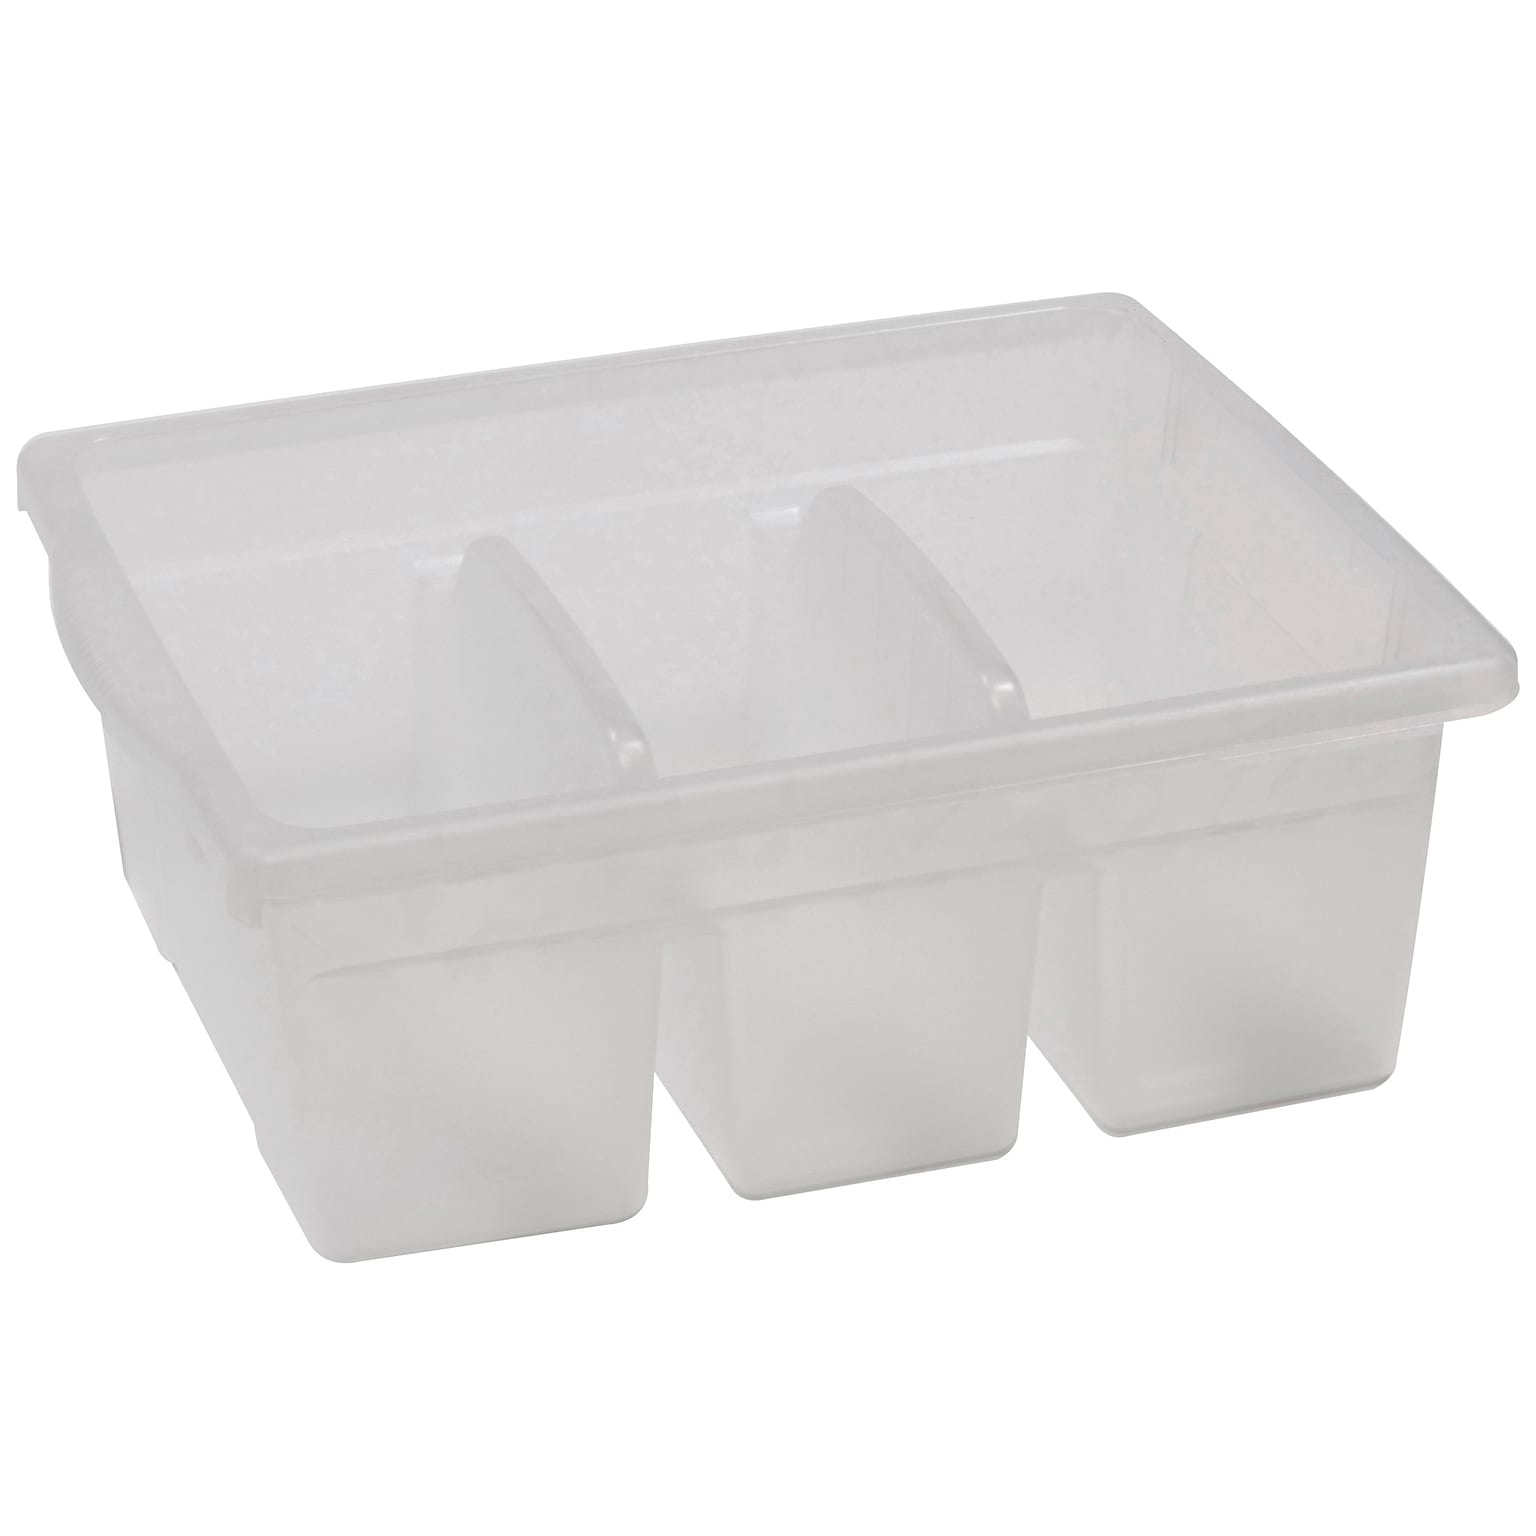 Copernicus Educational Products 15.75H x 12.5W Large Divided Plastic Tubs, Clear (CEPCC4069C)